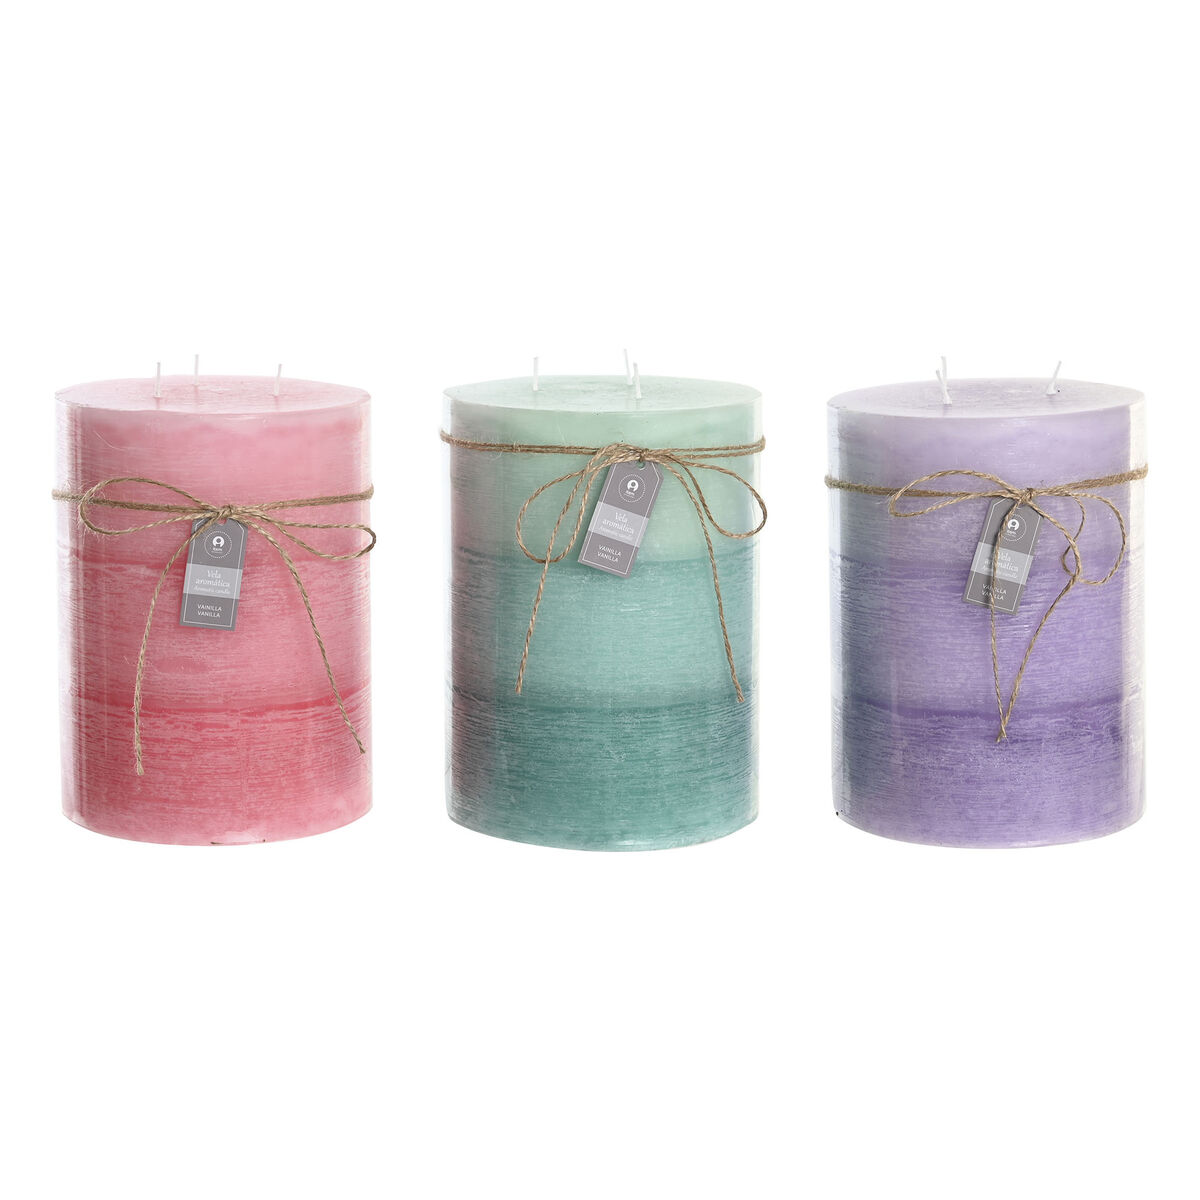 Scented Candle DKD Home Decor (3 Units)